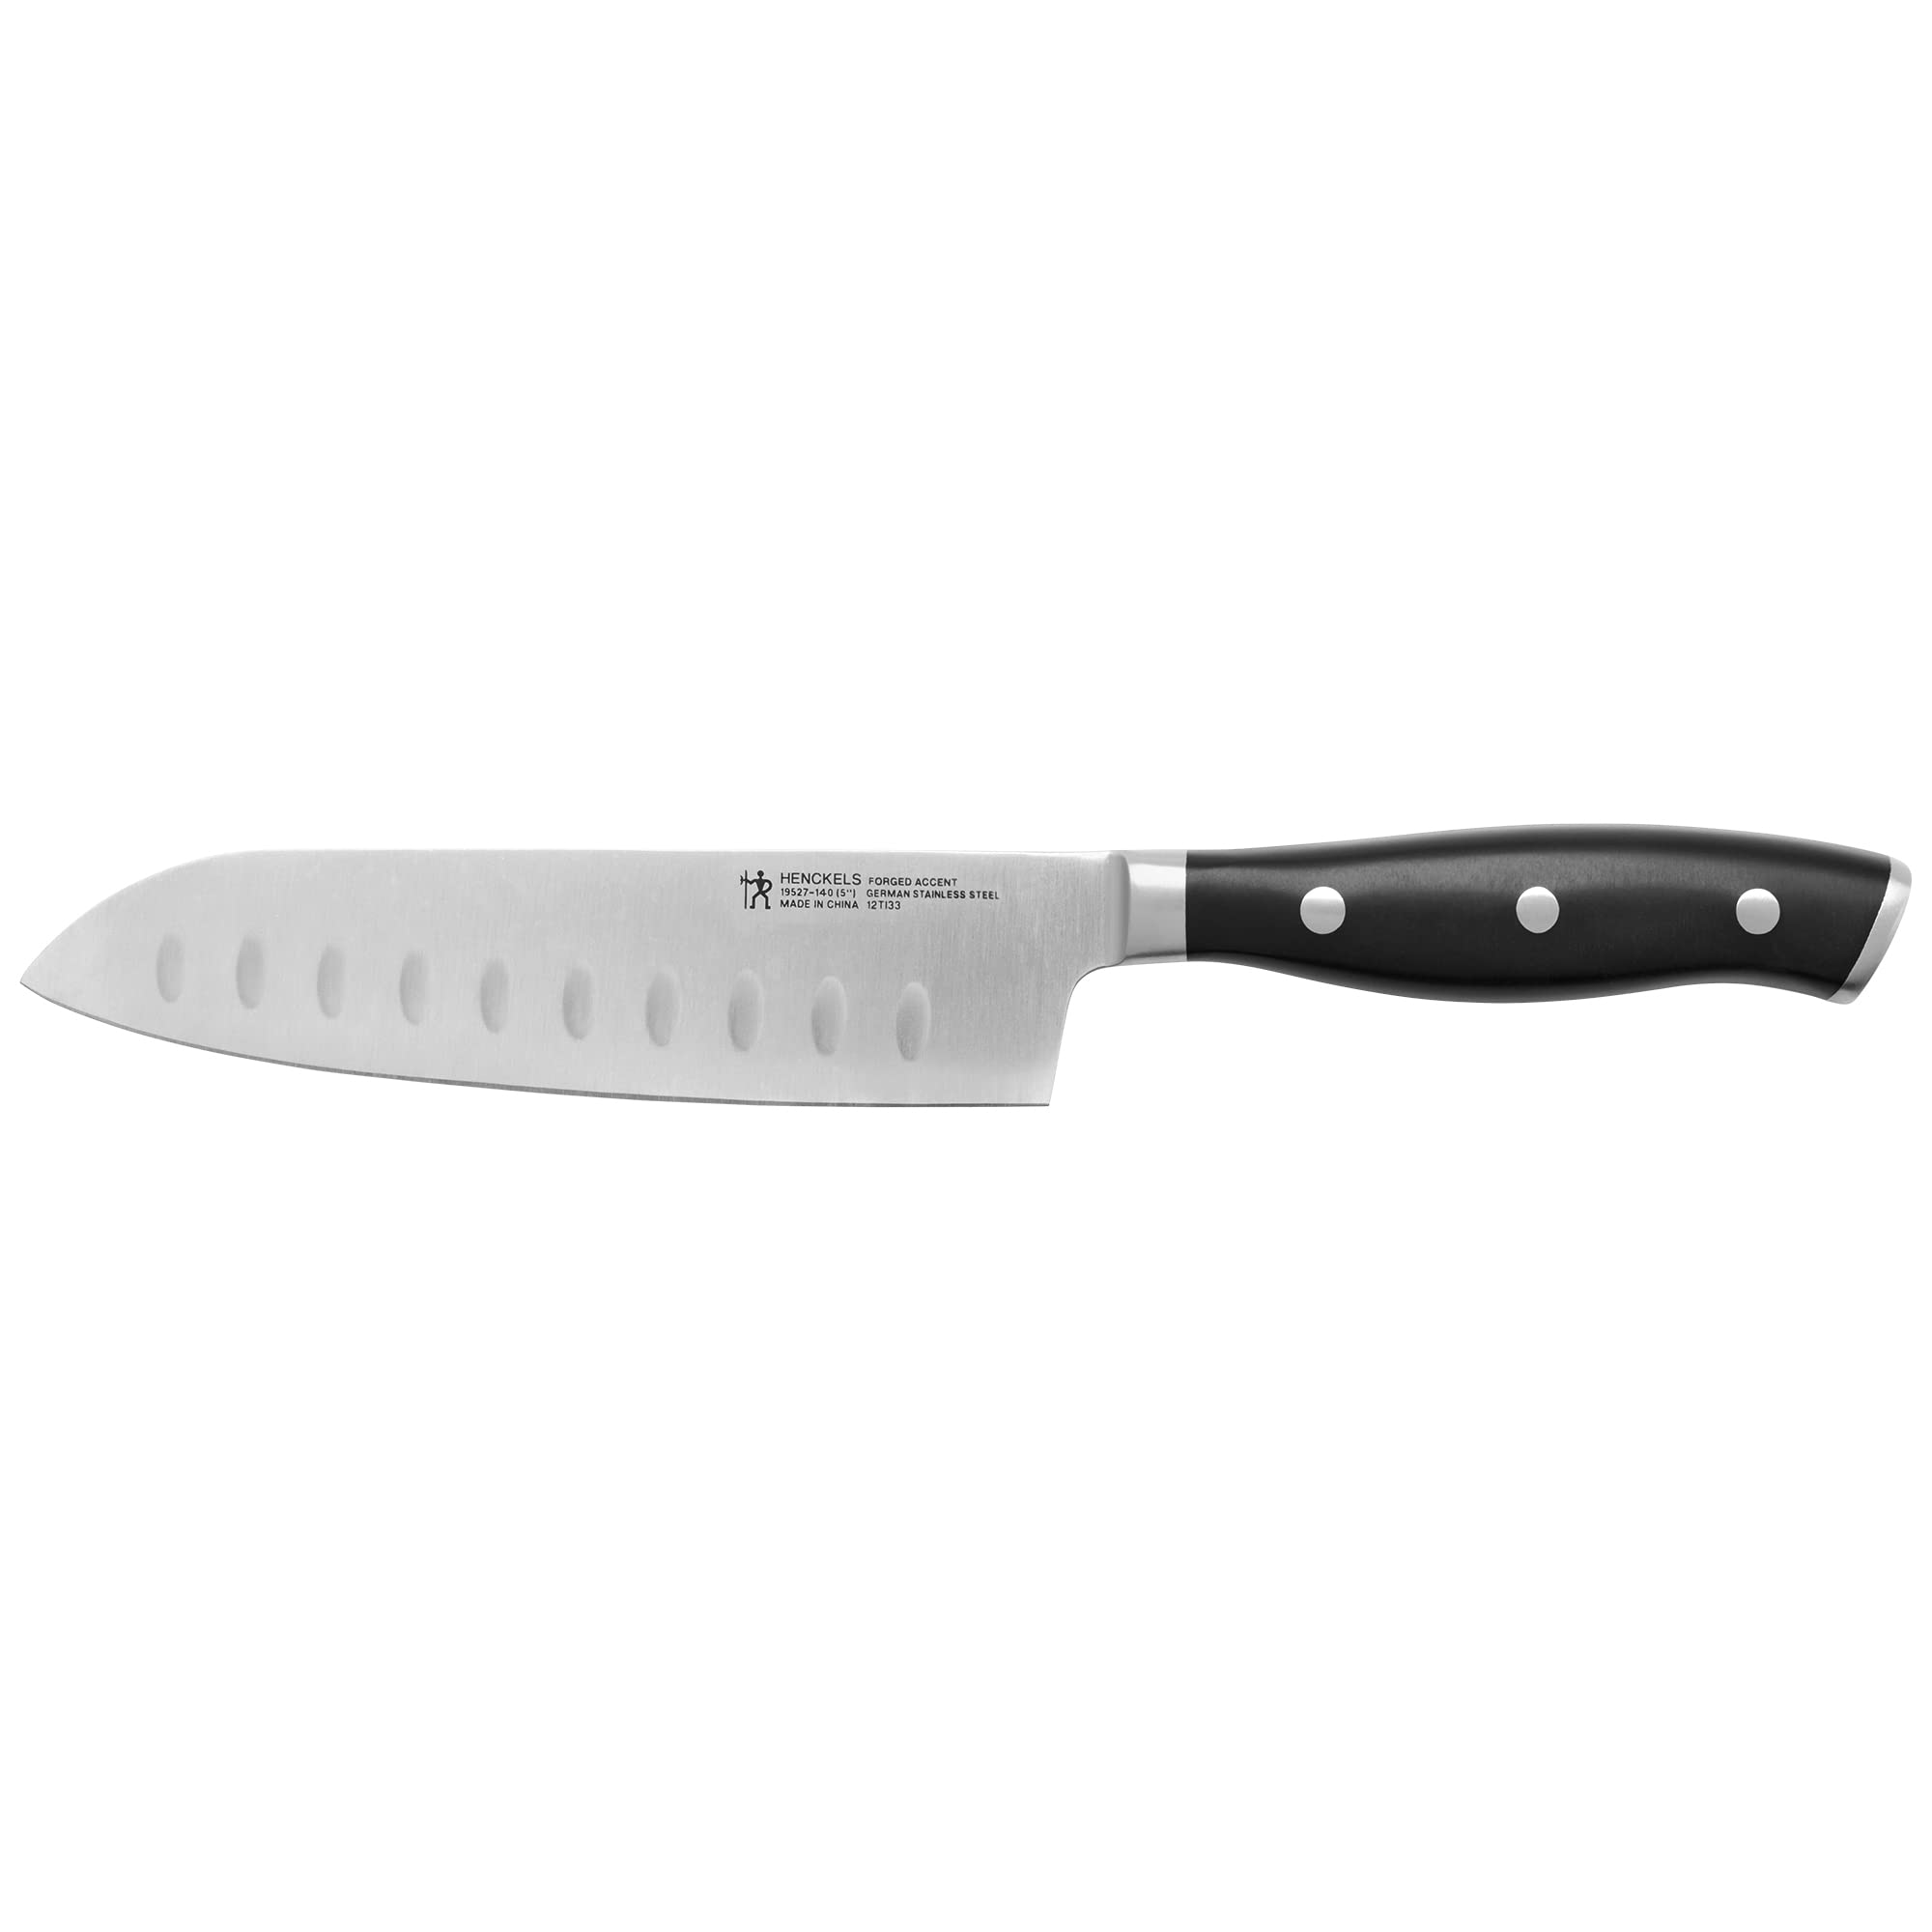 HENCKELS Forged Accent 5-inch Hollow Edge Santoku Knife